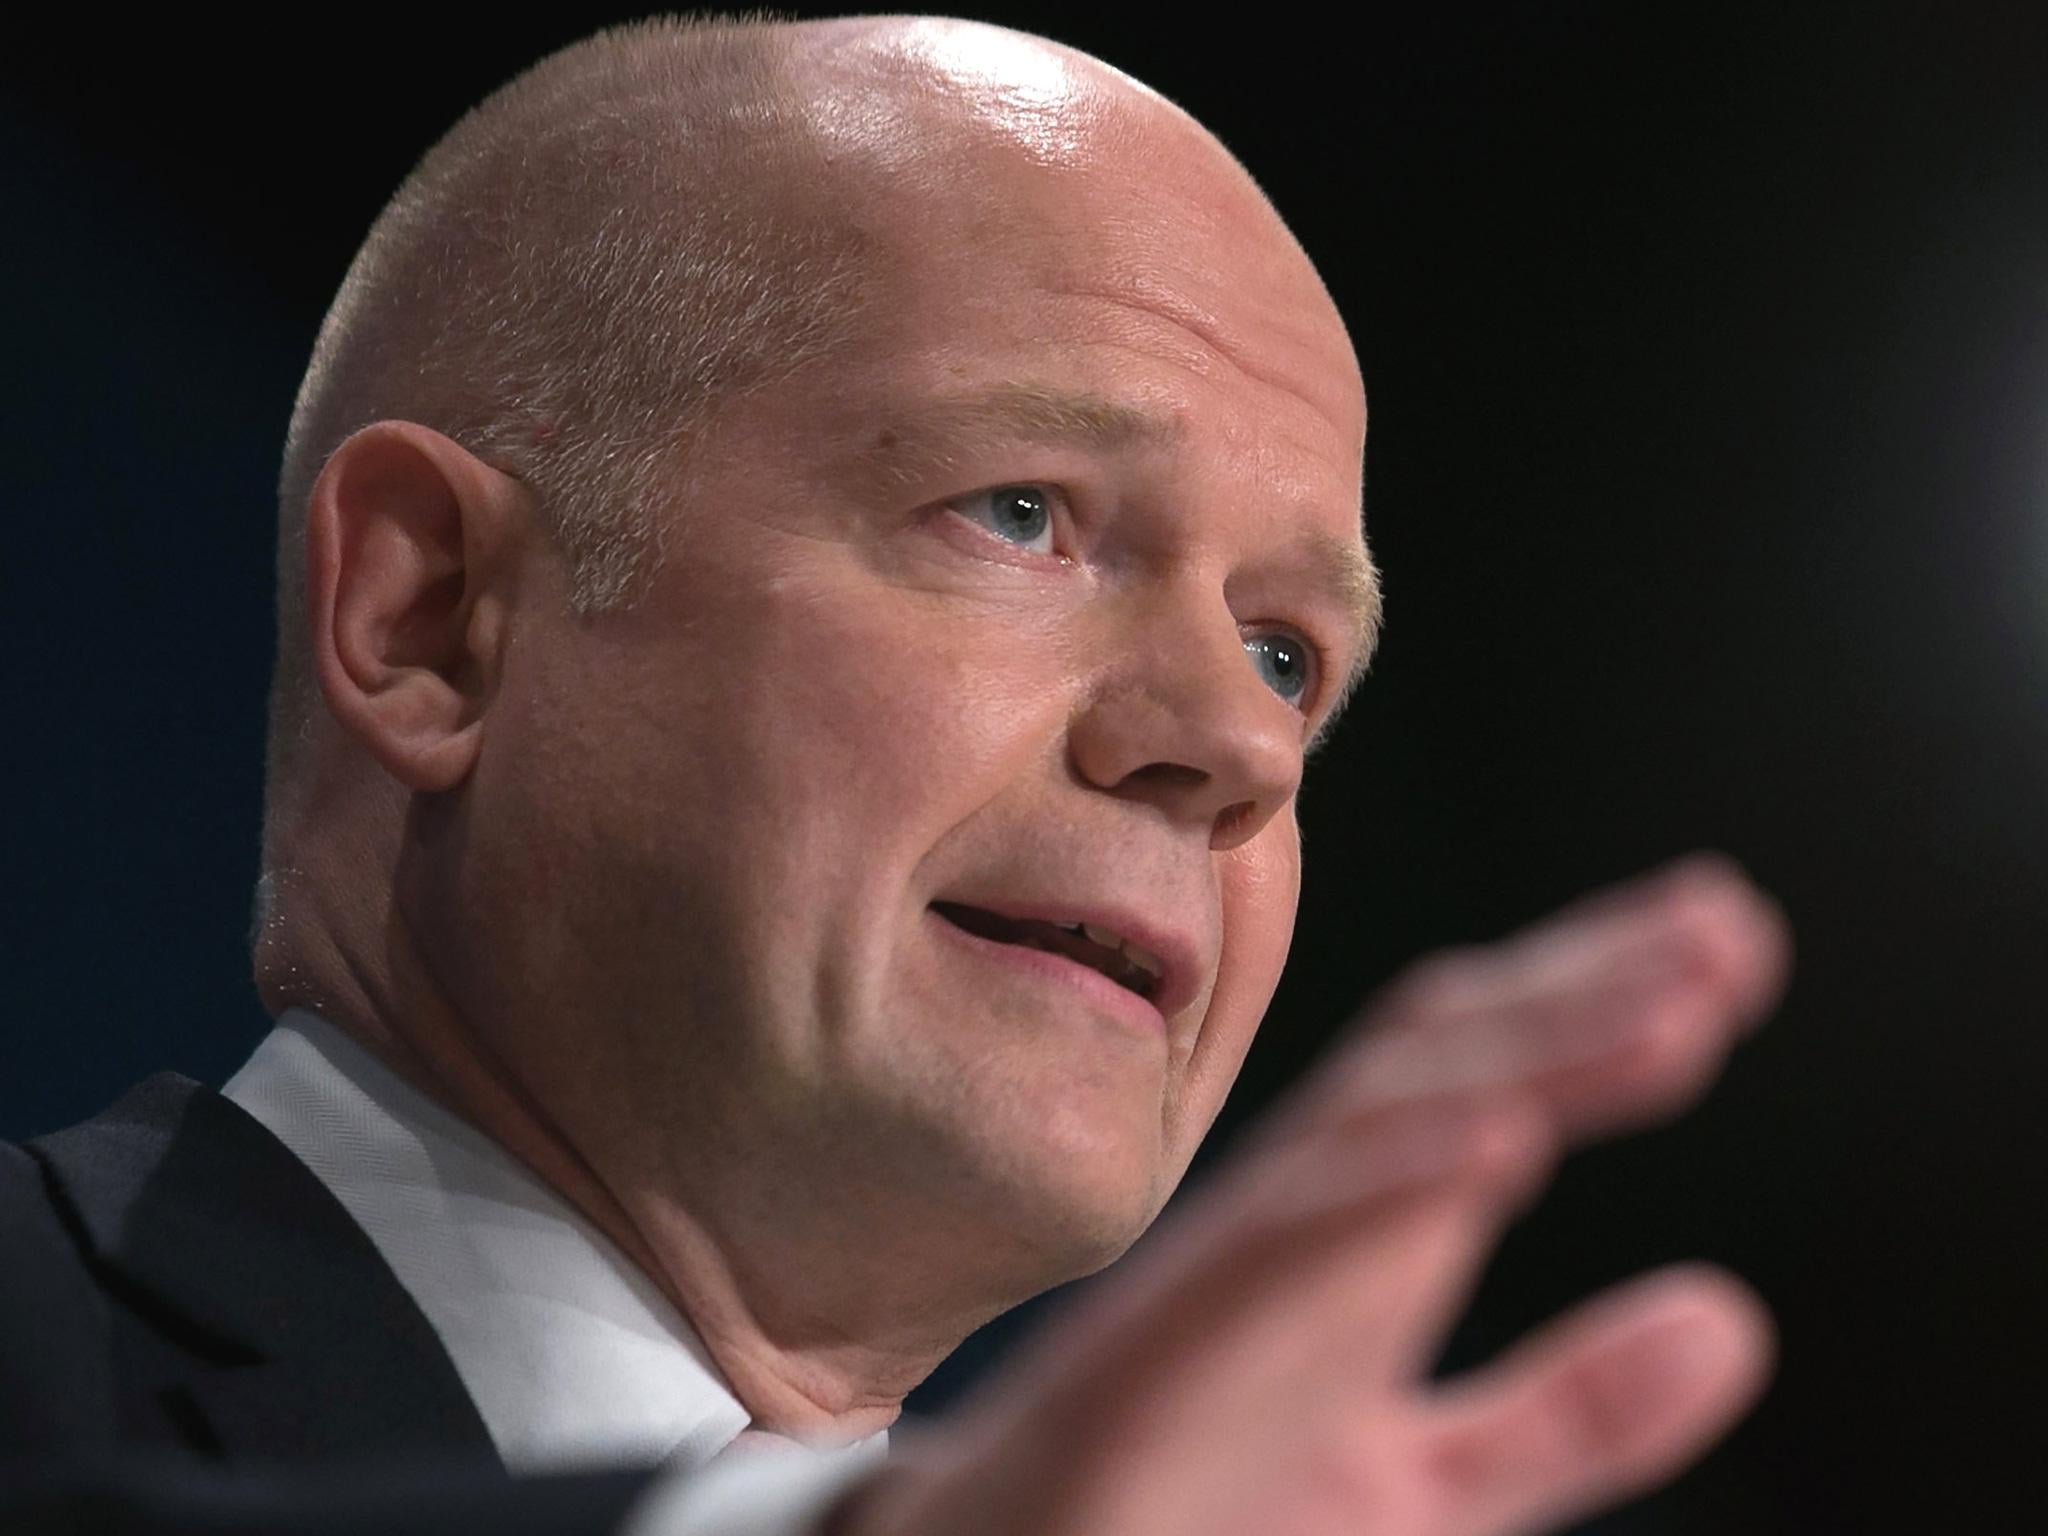 Former Tory leader William Hague warned 'trouble is coming' during the Brexit negotiations in the next two years